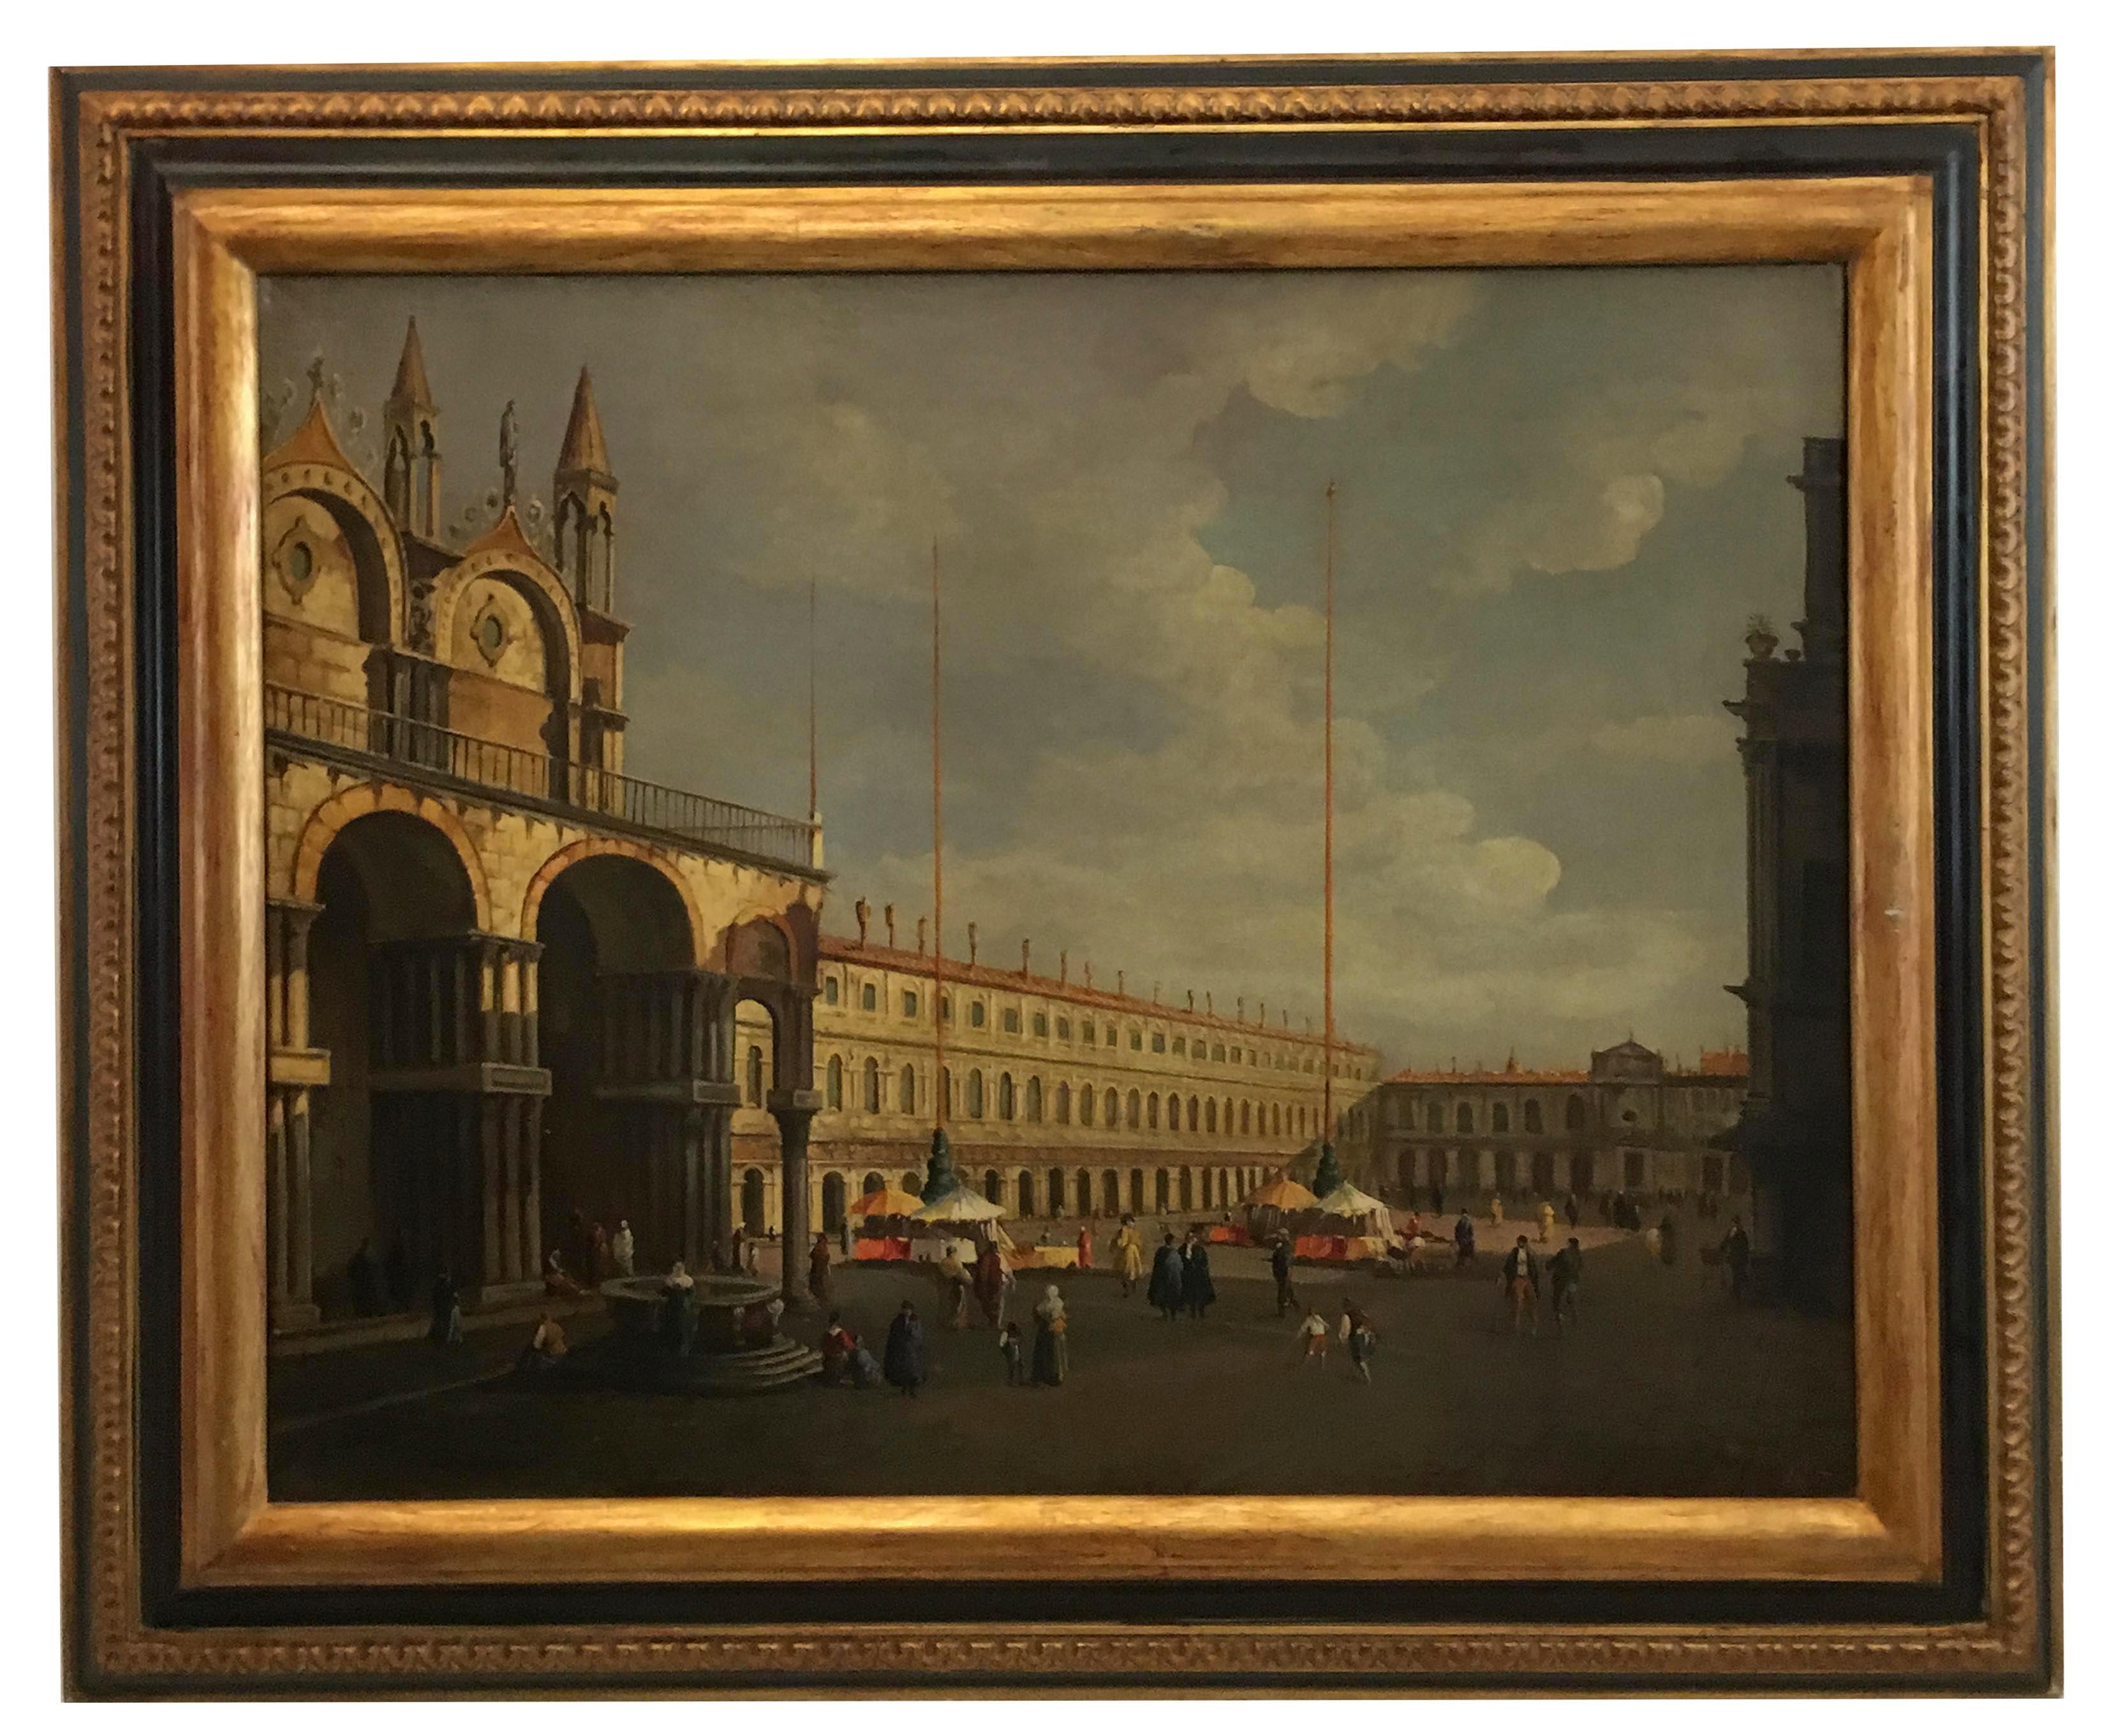 VENICE - In the Manner of Canaletto -Italian Landscape Oil on Canvas Painting